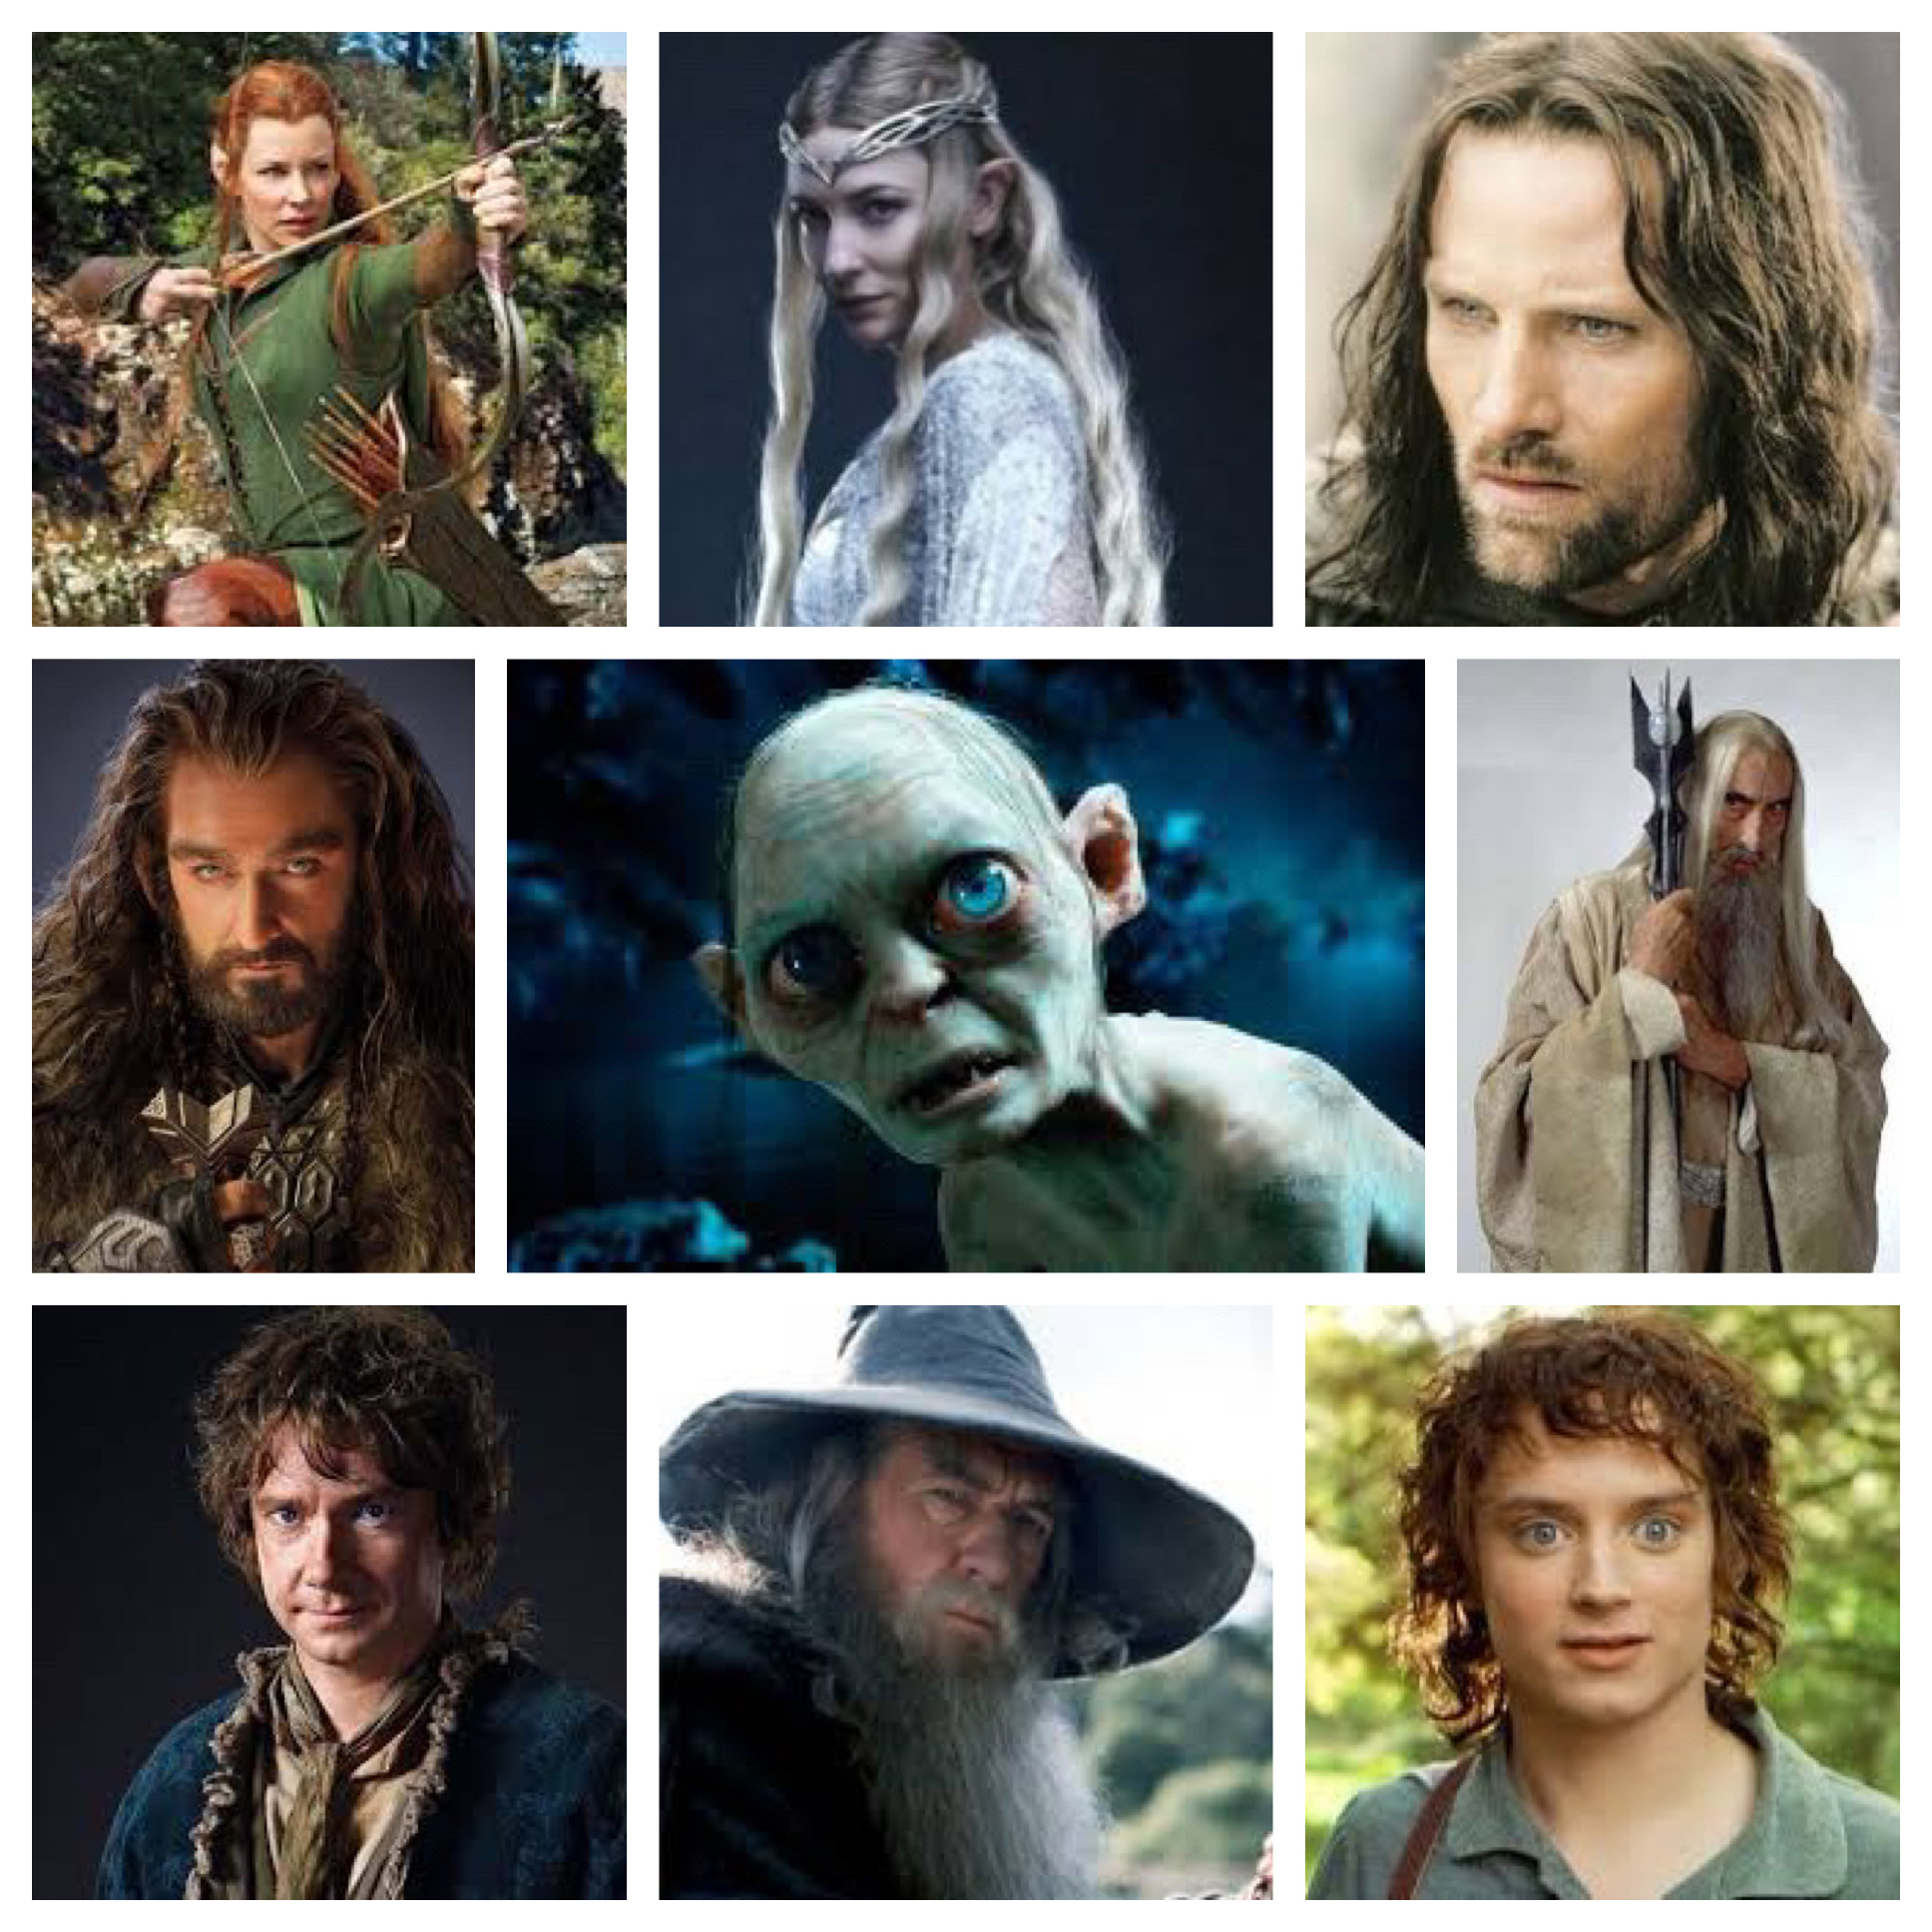 See The New Lord Of The Rings Characters From Amazon's Series